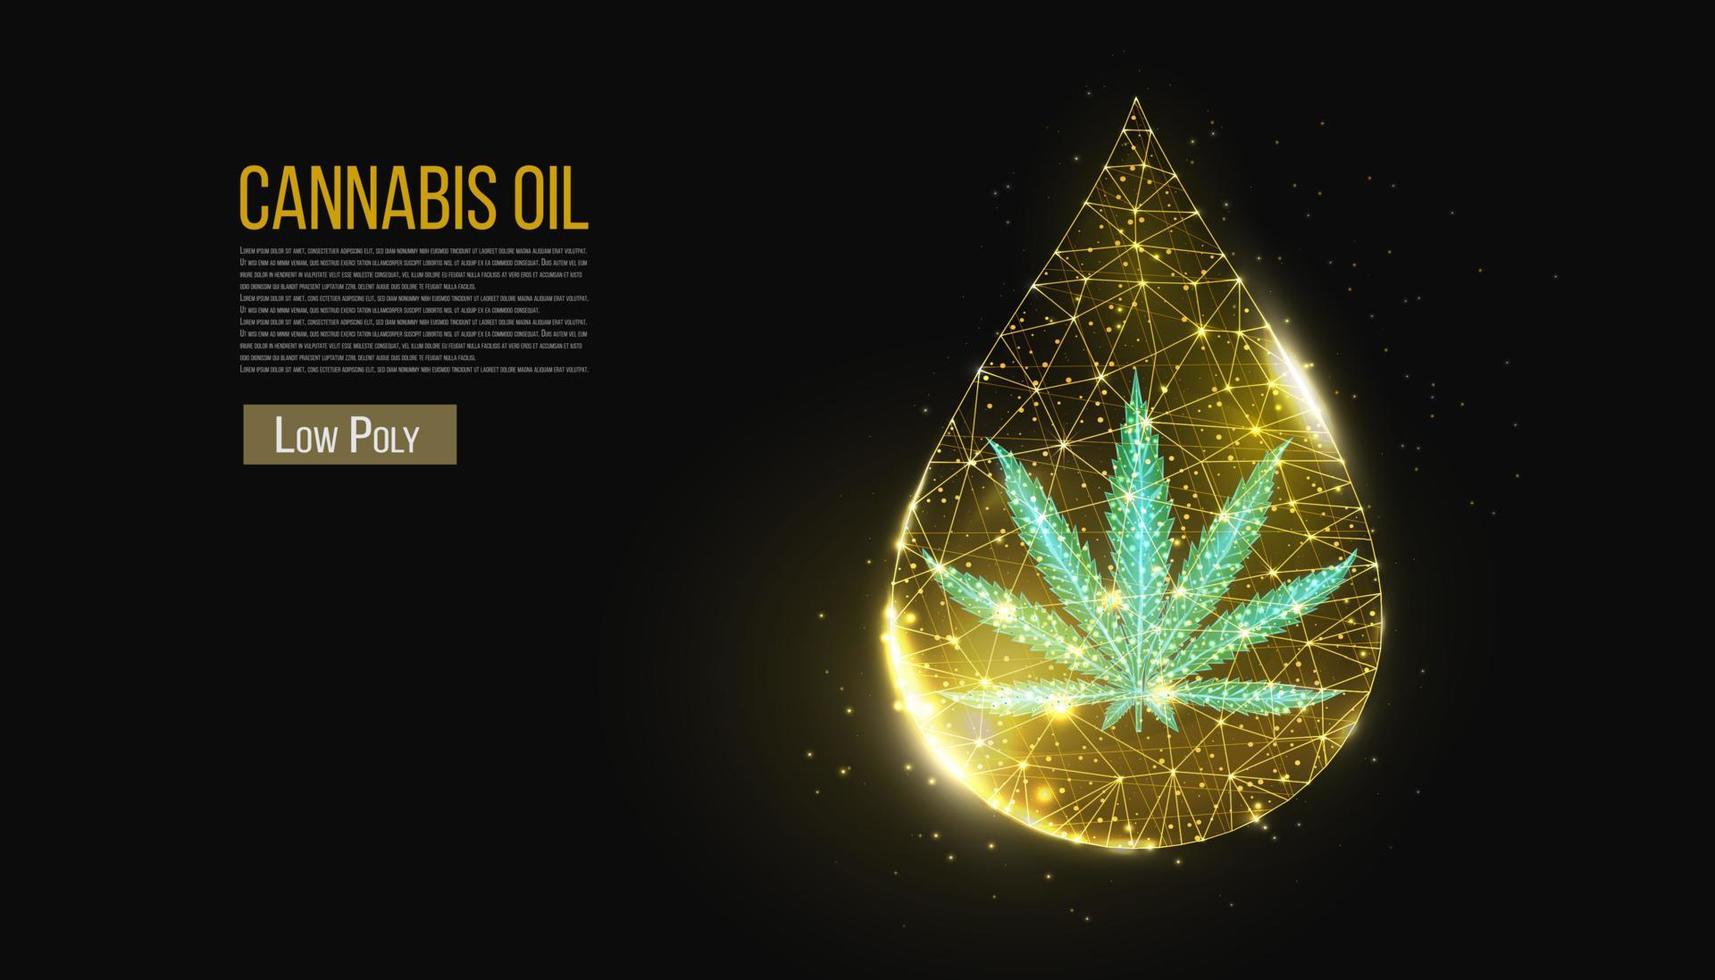 Cannabis oil concept. Low poly hemp and oil drop on black background. Marijuana leaf wireframe light connection structure, 3d polygonal graphic. Vector illustration.